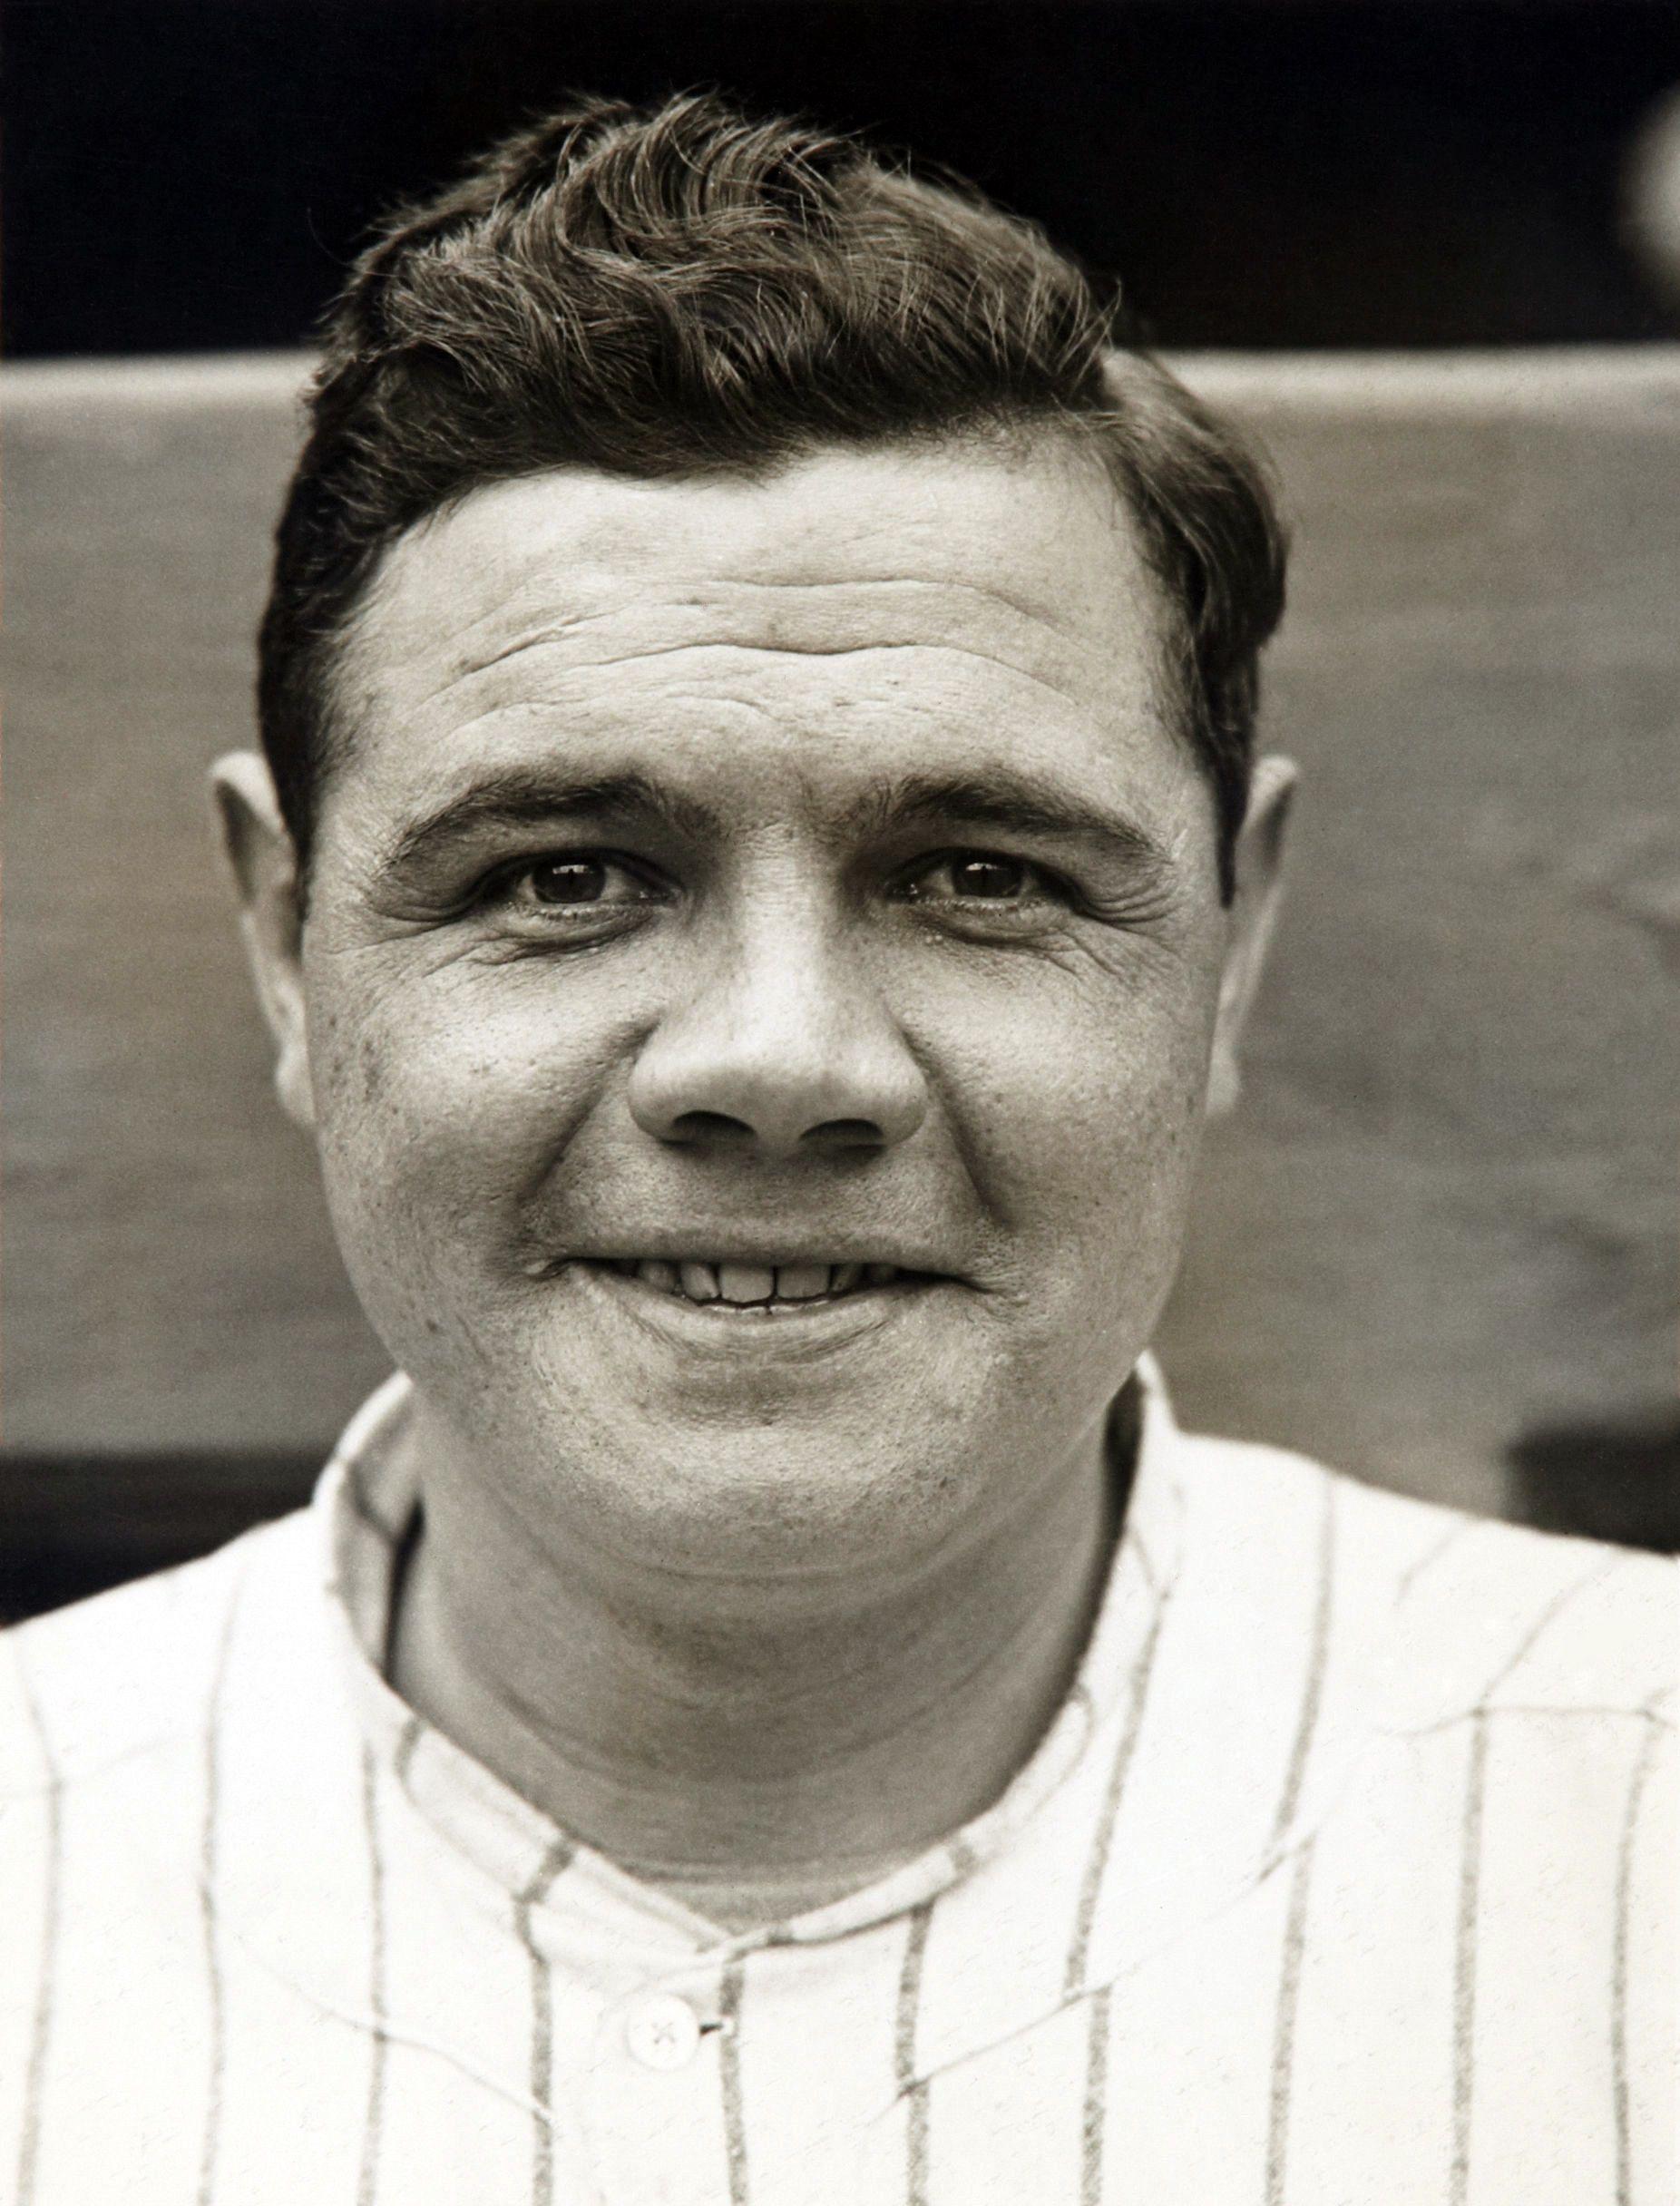 Babe Ruth, The Bambino, ca. around the time he would've